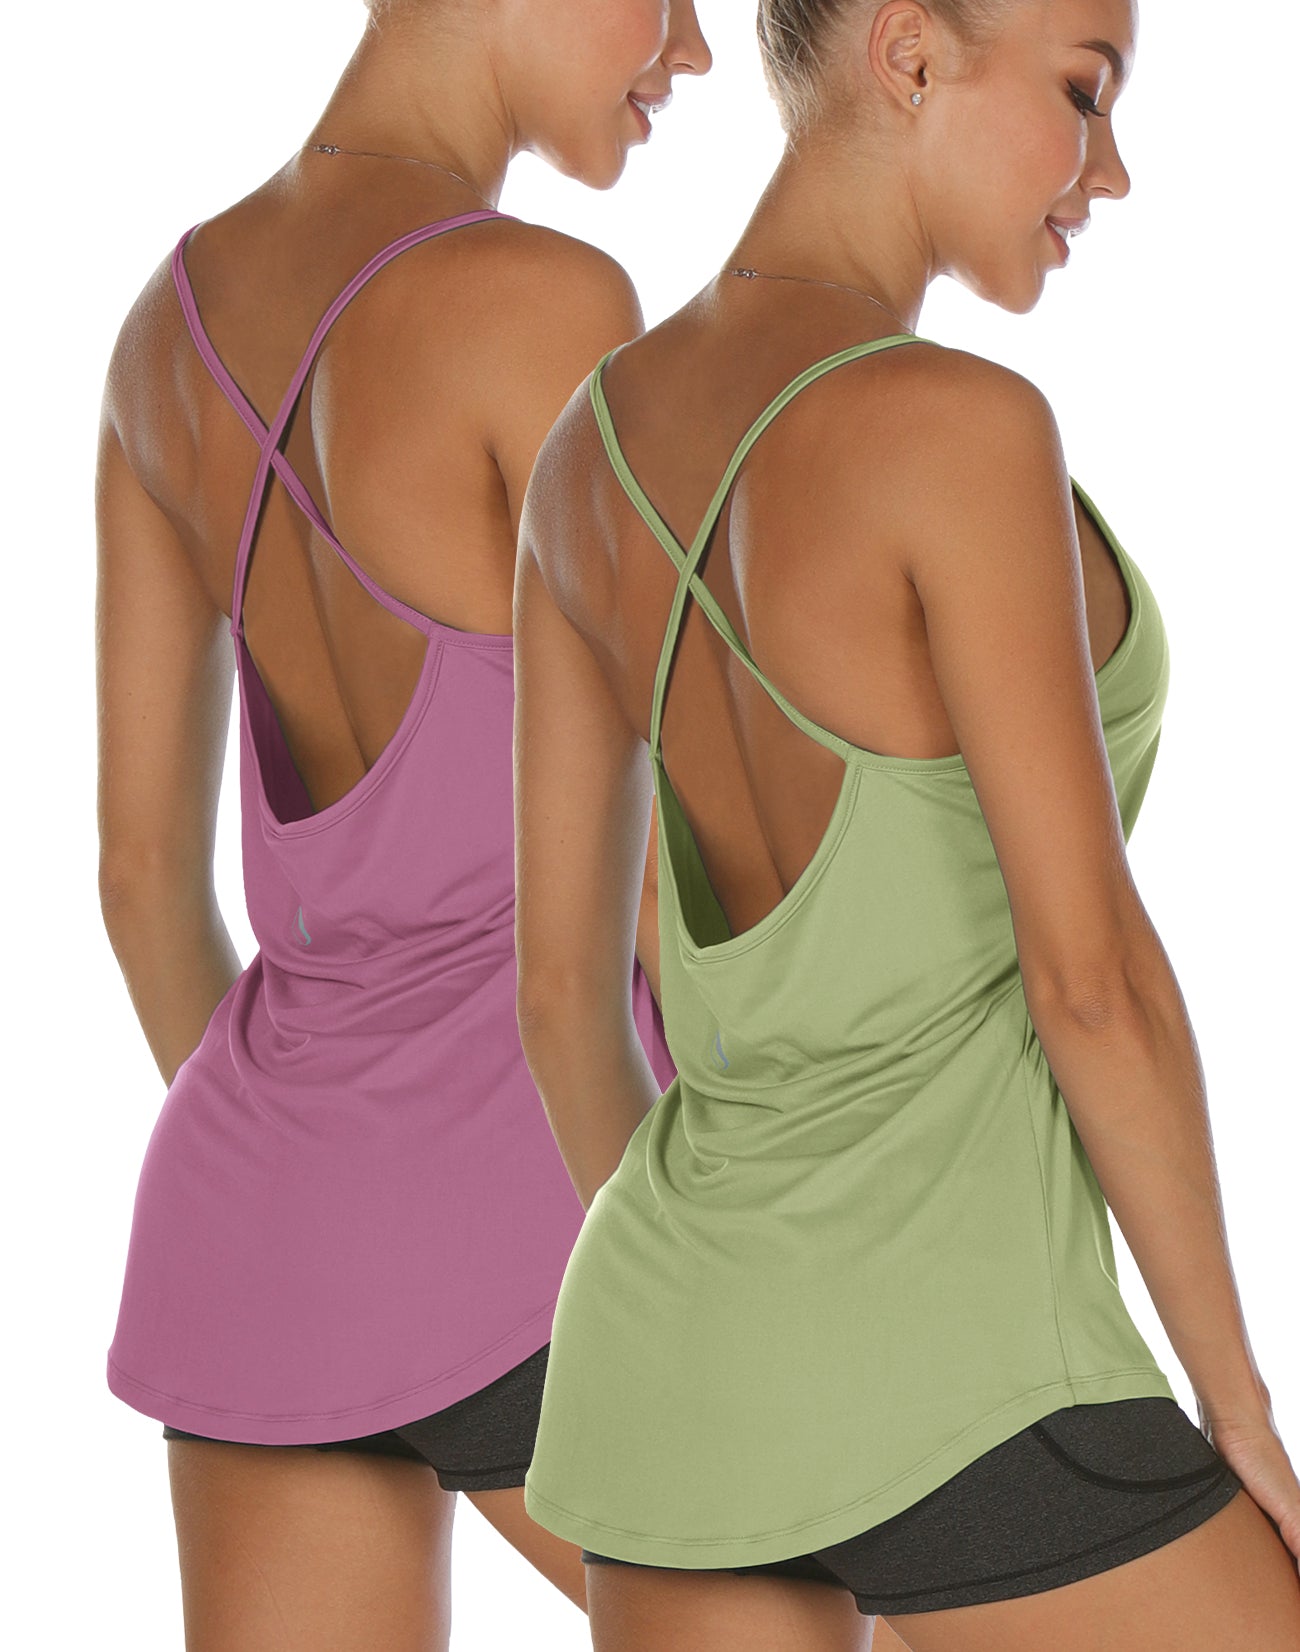 Women's Racerback Workout Athletic Running Tank Tops Flowy Loose Fit Yoga  Shirts 